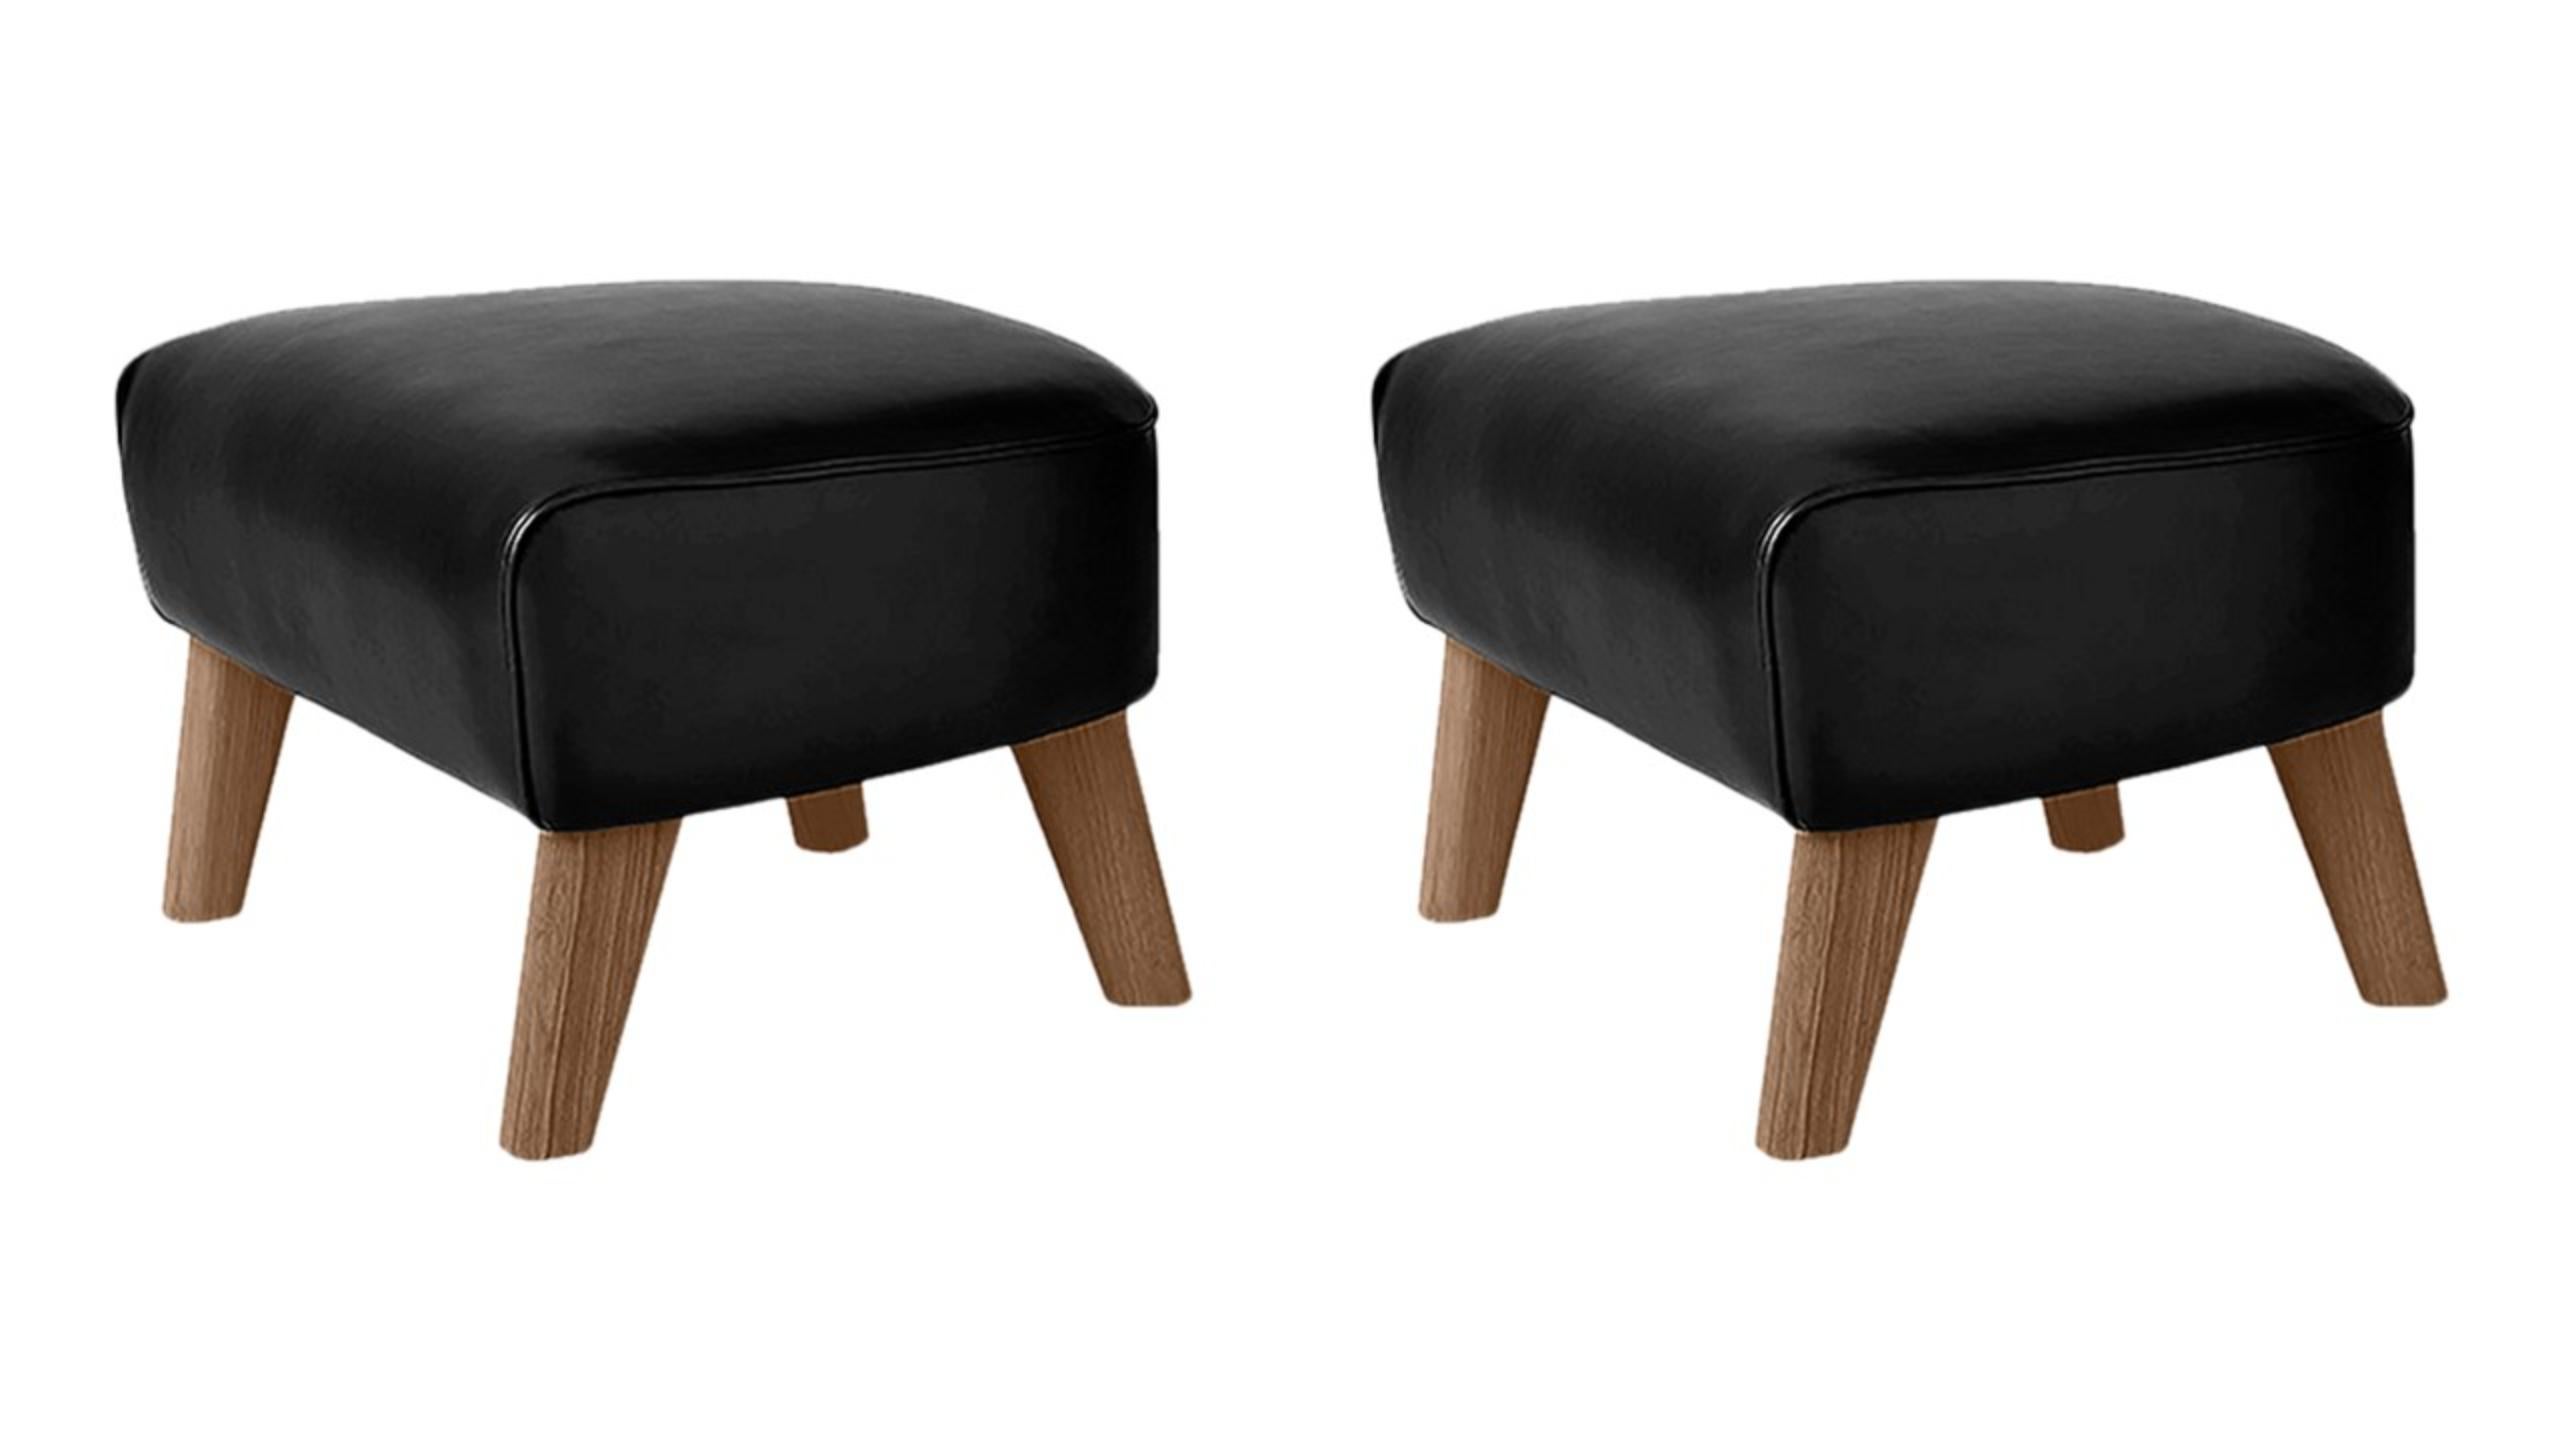 Set of 2 Black Leather and Smoked Oak My Own Chair footstools by Lassen
Dimensions: W 56 x D 58 x H 40 cm 
Materials: Leather

The My Own Chair Footstool has been designed in the same spirit as Flemming Lassen’s original iconic chair, reflecting